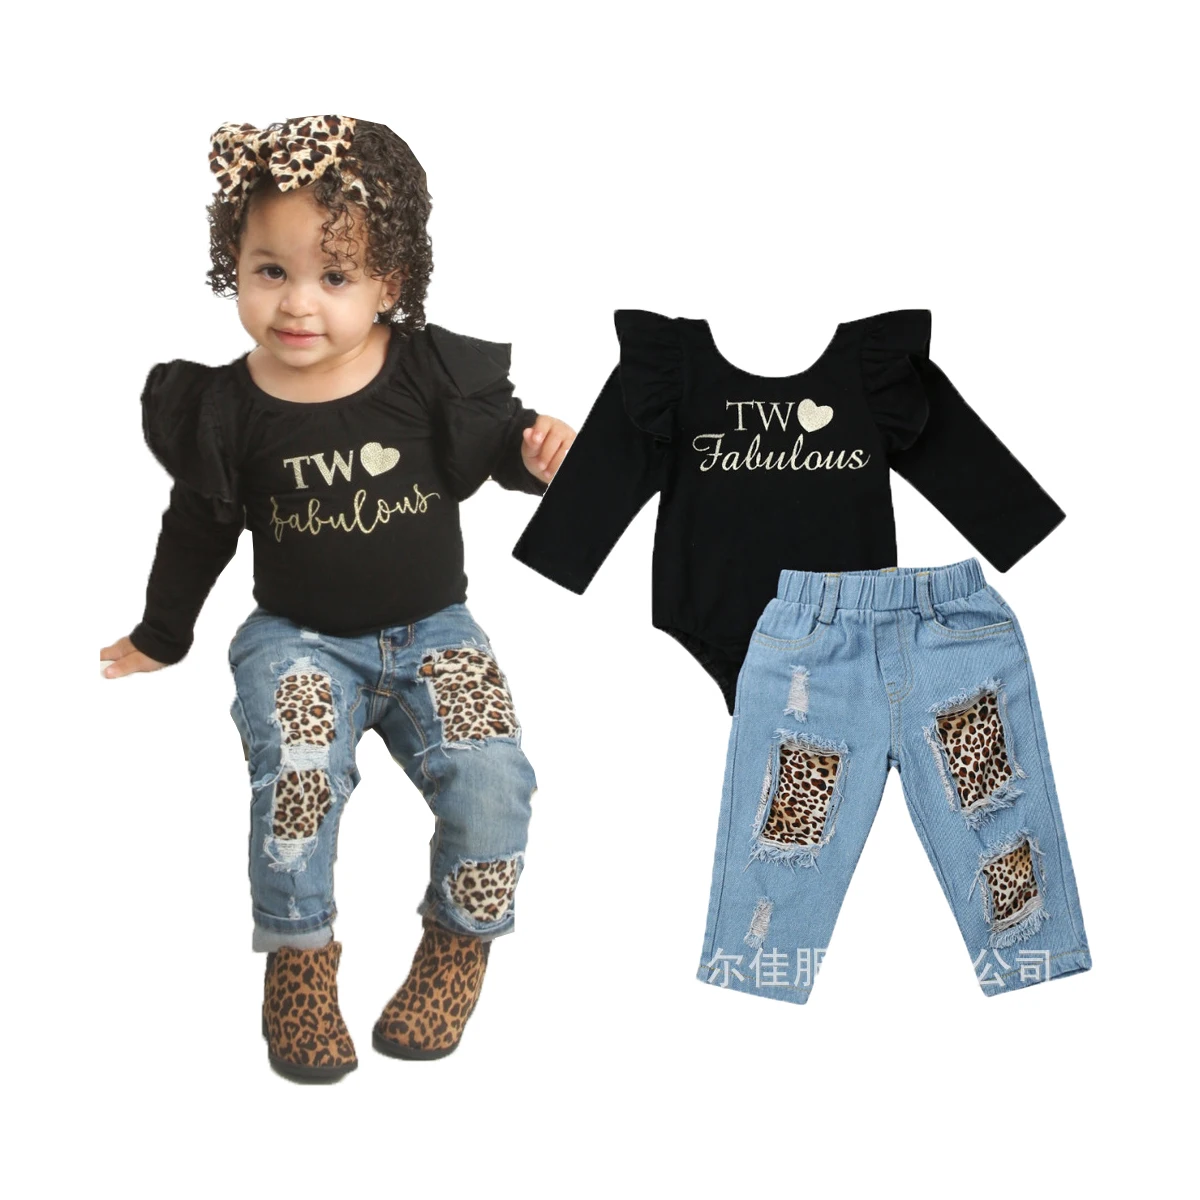 Kids Toddler Baby Boys Outfits Long Sleeve Shirt Ripped Denim Jeans Clothing Set 